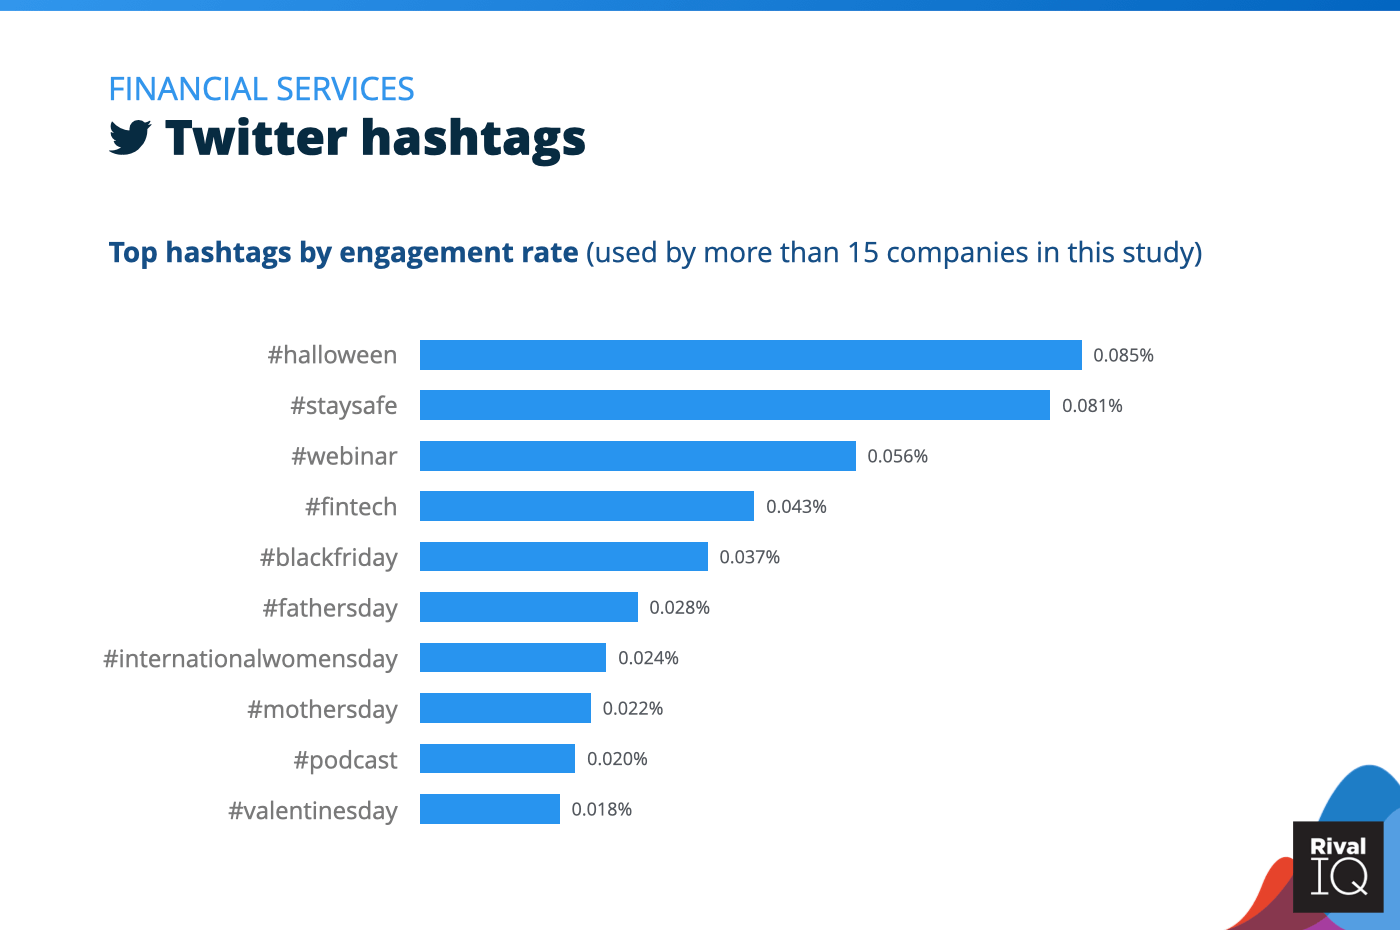 Chart of Top Twitter hashtags by engagement rate, Financial Services